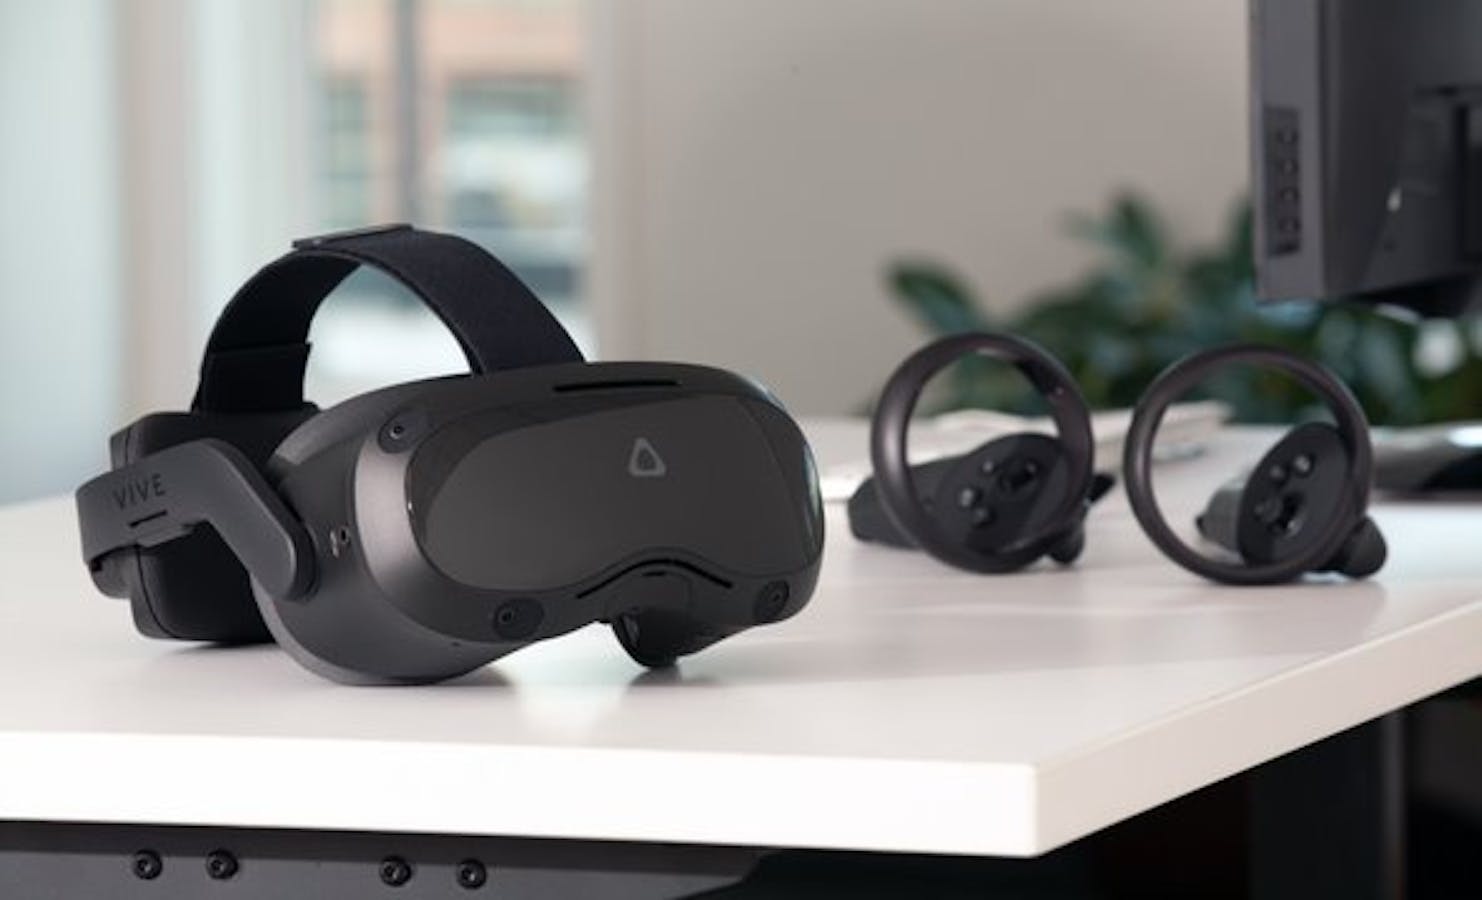 The Focus 3, one of the Vive VR headsets released earlier this year. Credit: HTC